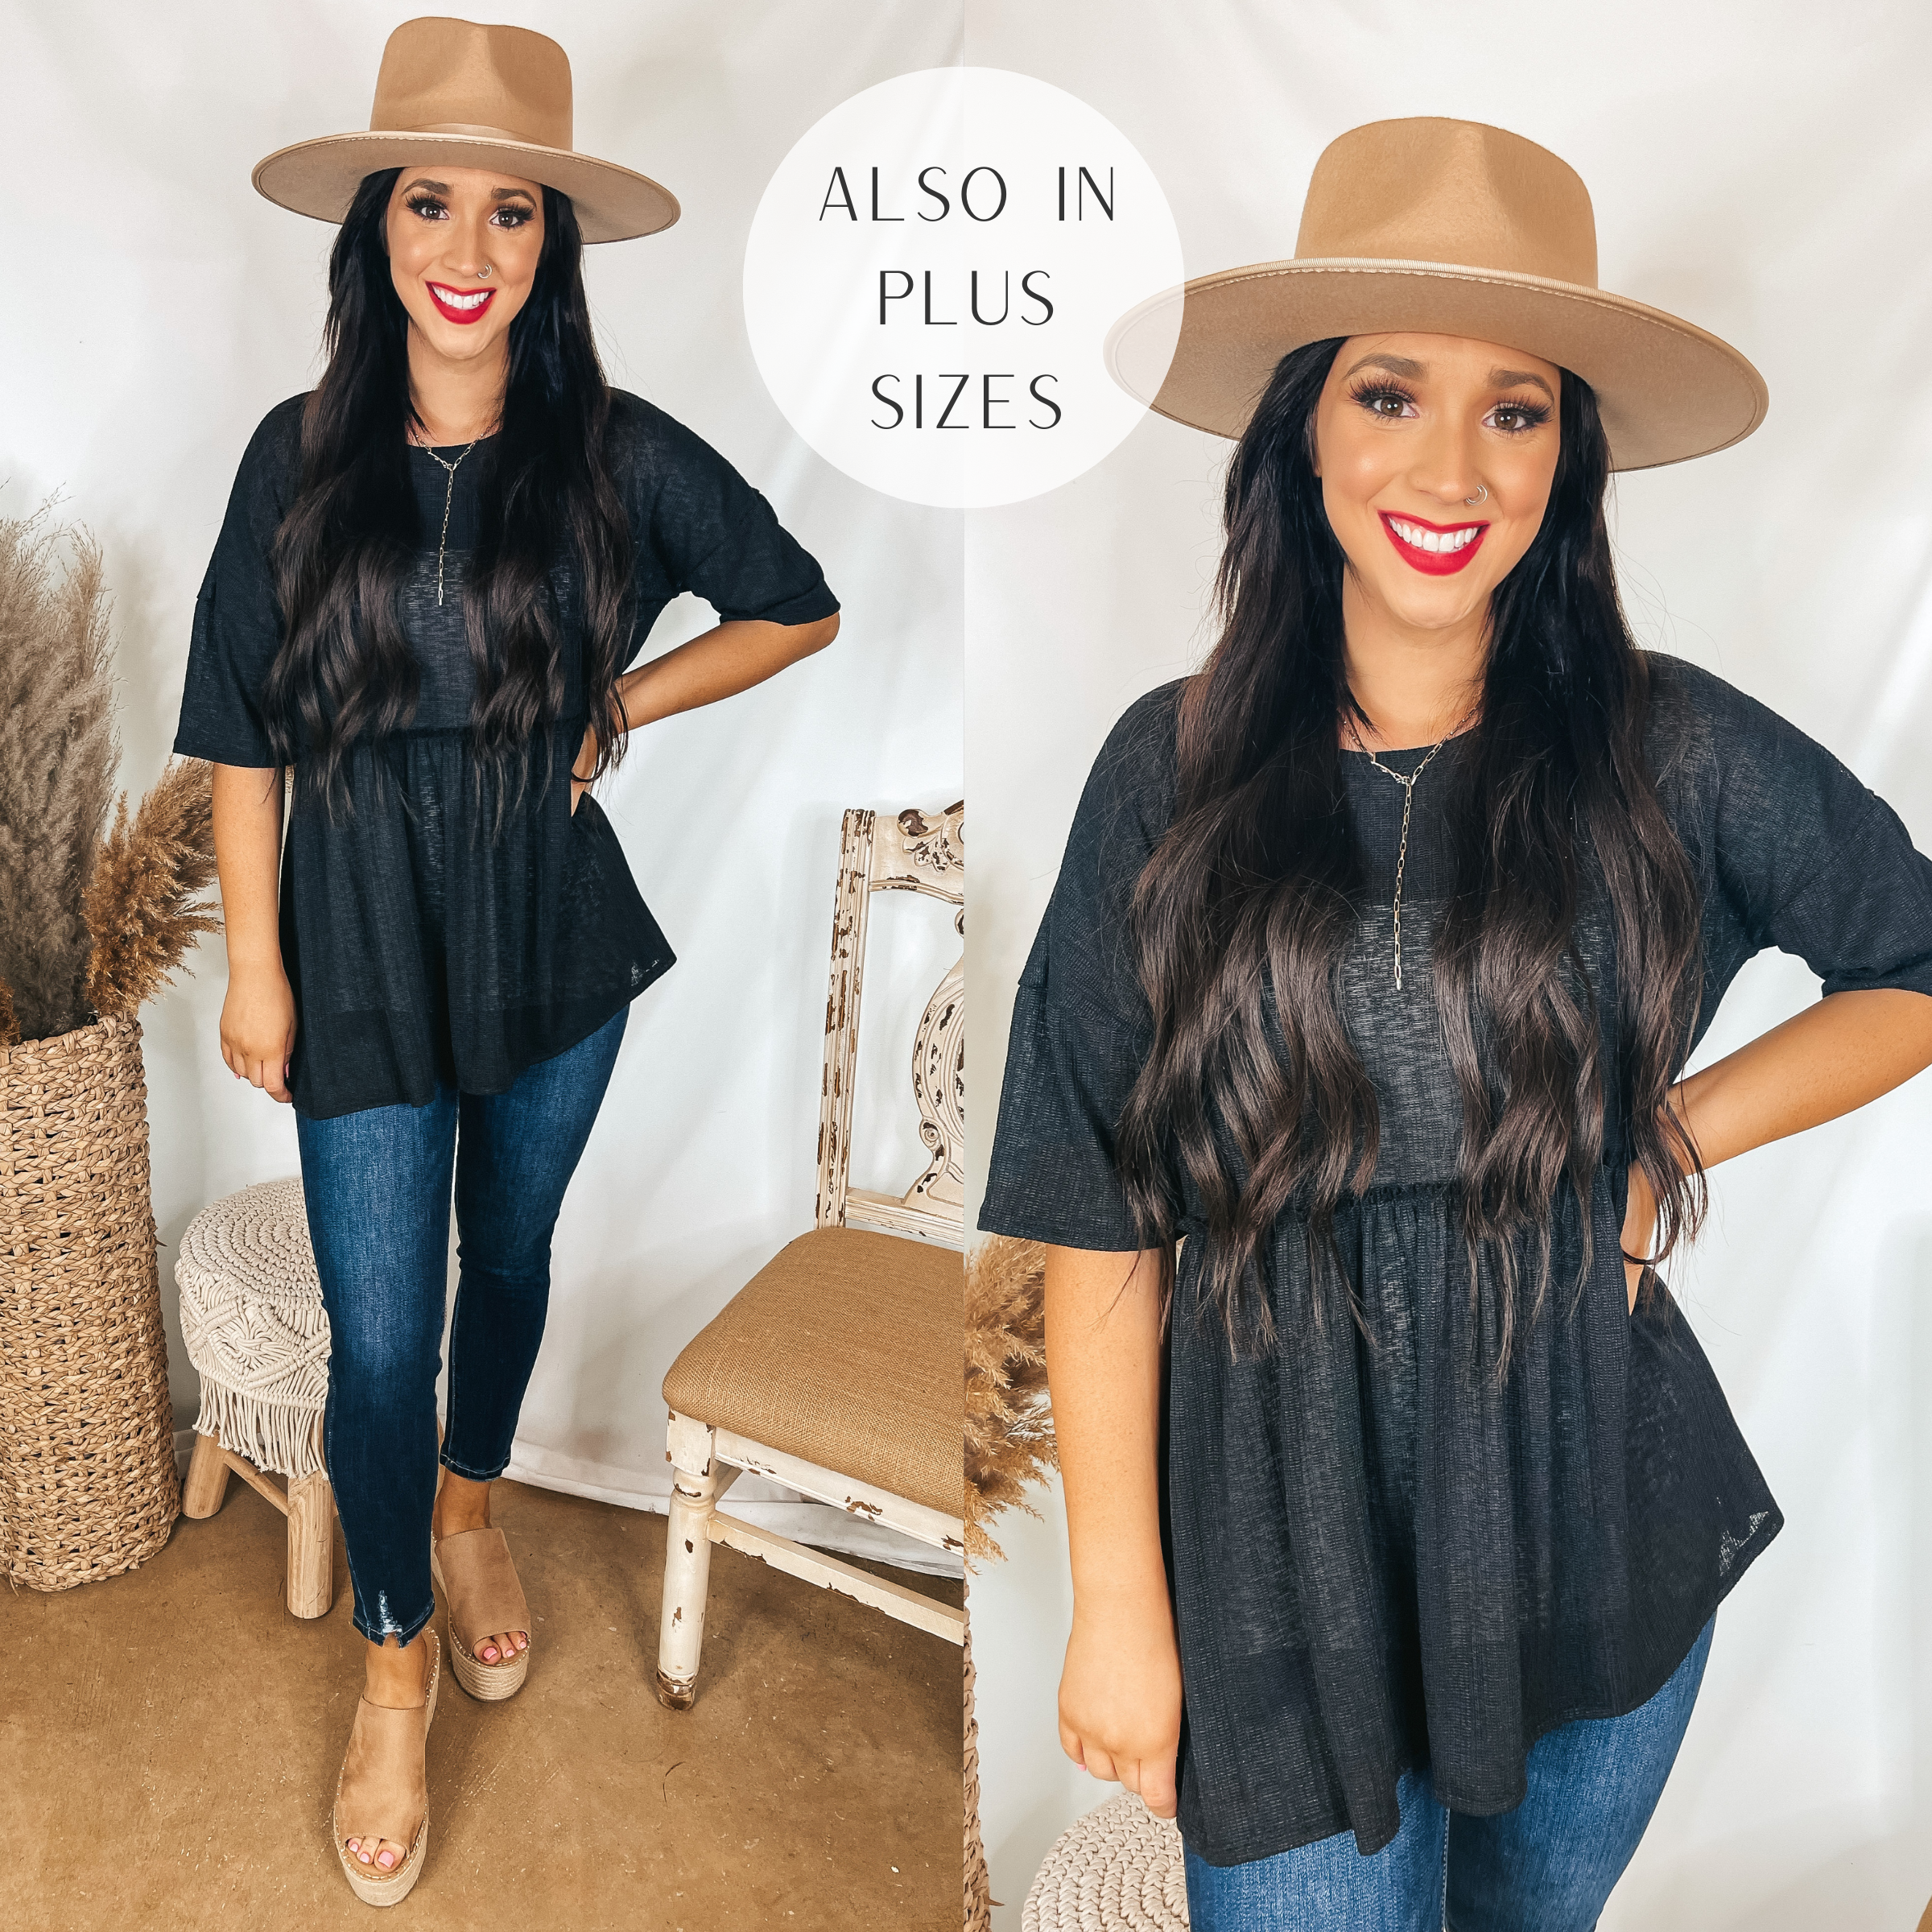 Model is wearing a black short sleeve babydoll top. Model has it paired with dark wash skinny jeans, tan wedges, and a tan hat.